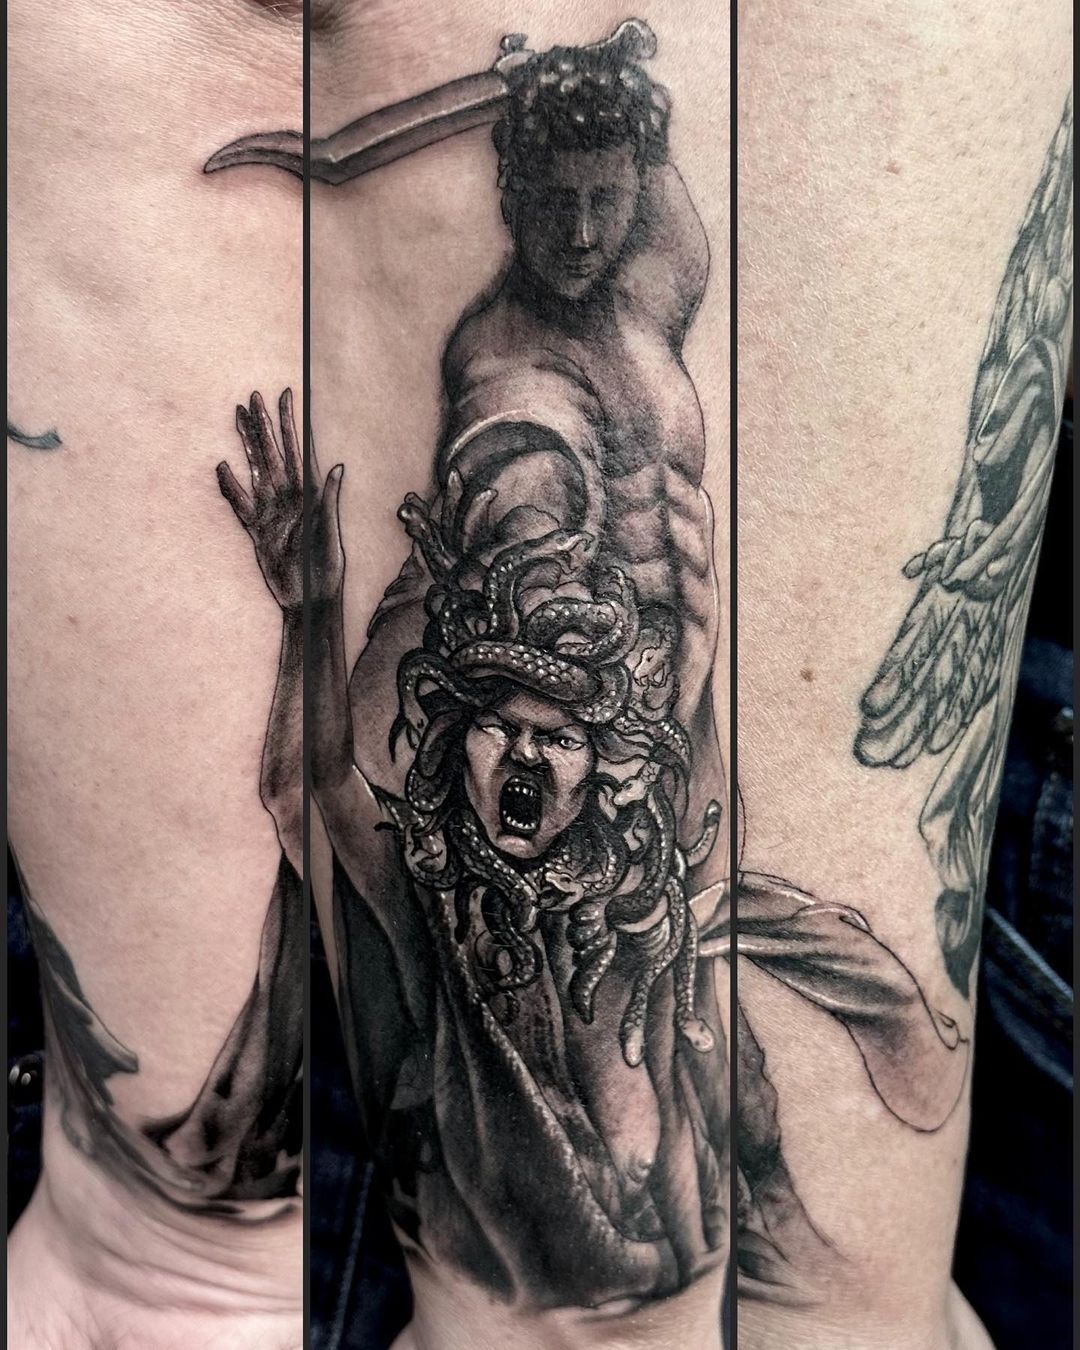 Thank you so much David for your trust and can’t wait for our next session to closed your arm with more ink. ____________________________________________ #perseus #medusa #medusabeheaded #blackandgreytattoo #londontattoo #londonguesttattooartist...